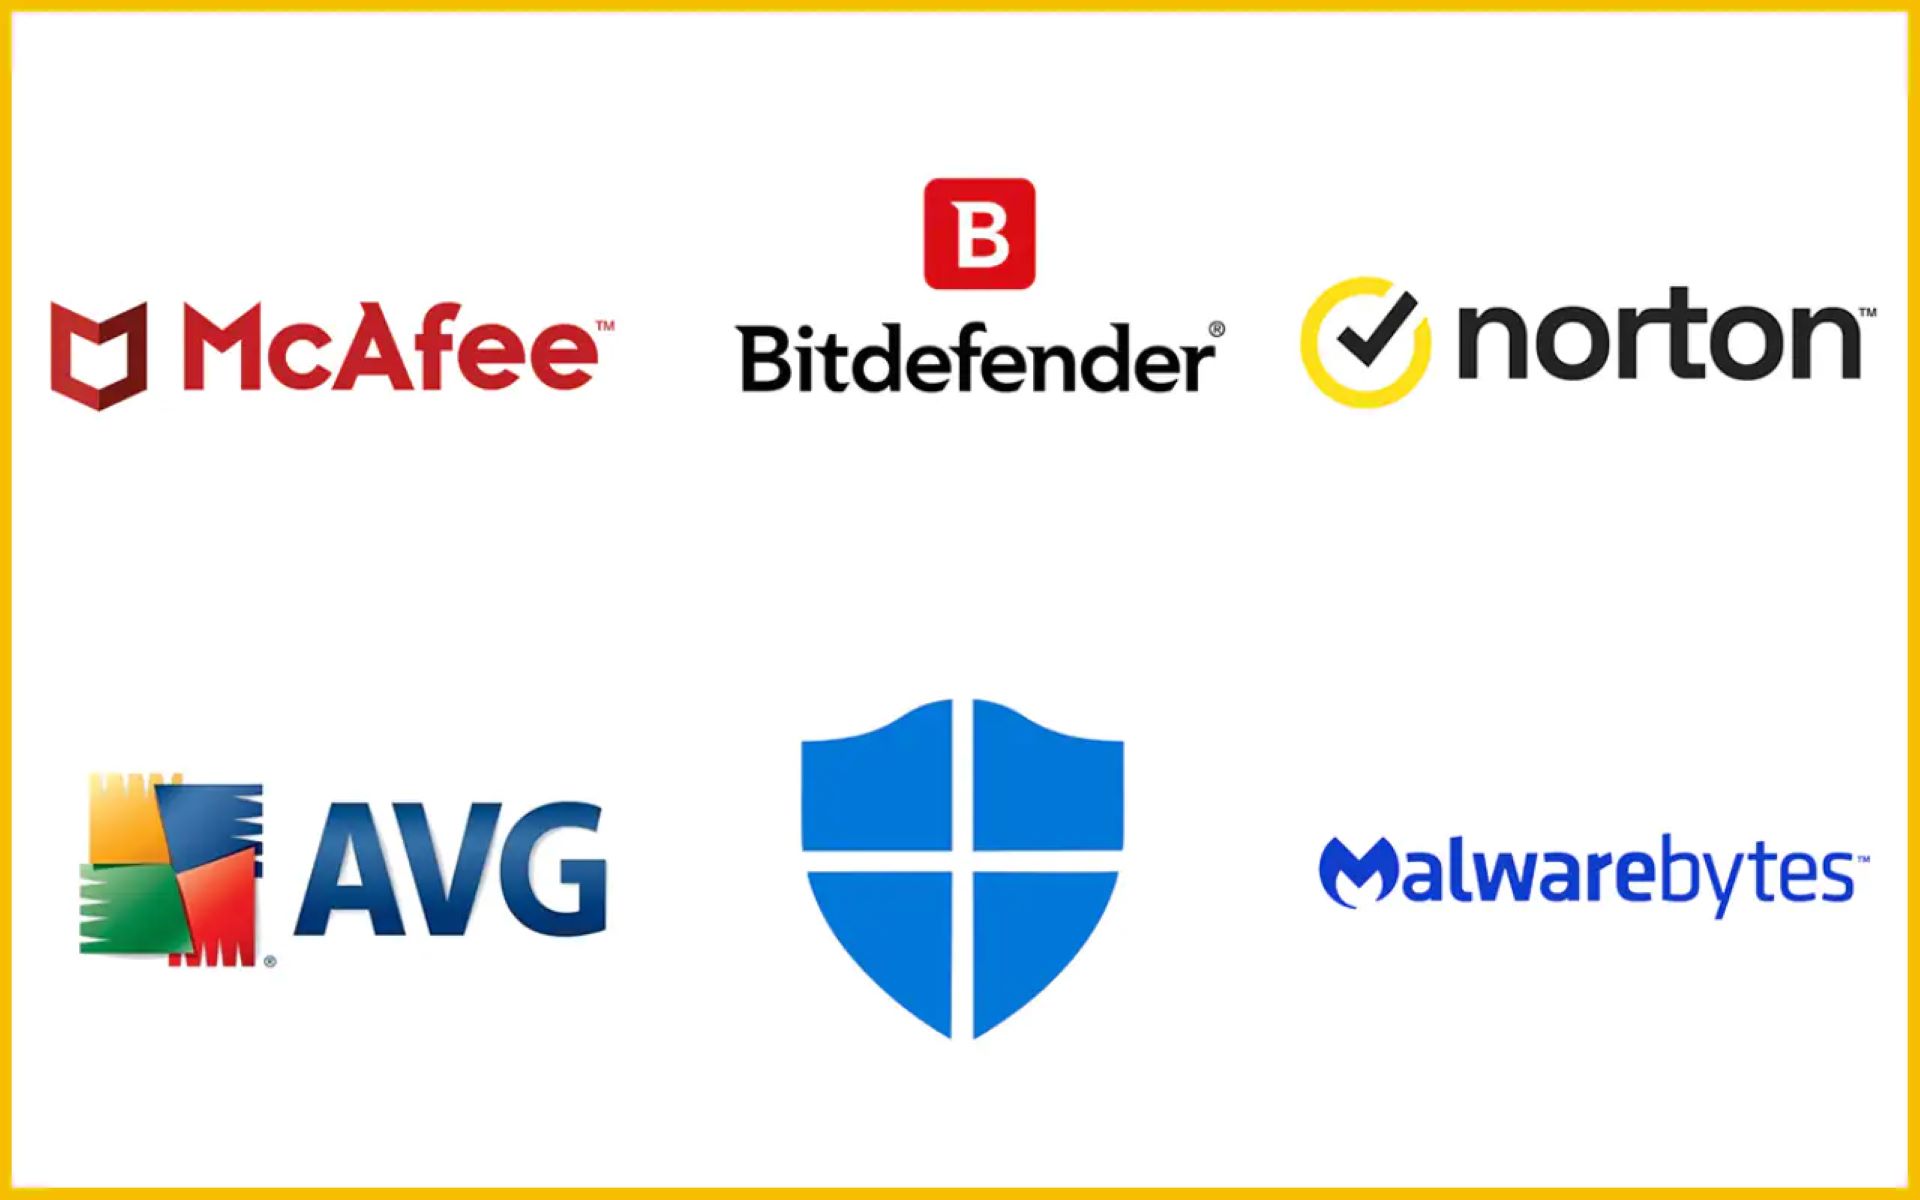 Bitdefender Antivirus Plus: A powerful antivirus solution known for its high detection rates and minimal impact on system performance.
Windows Defender: A built-in security feature in Windows operating systems that offers basic protection against malware and other malicious activities.